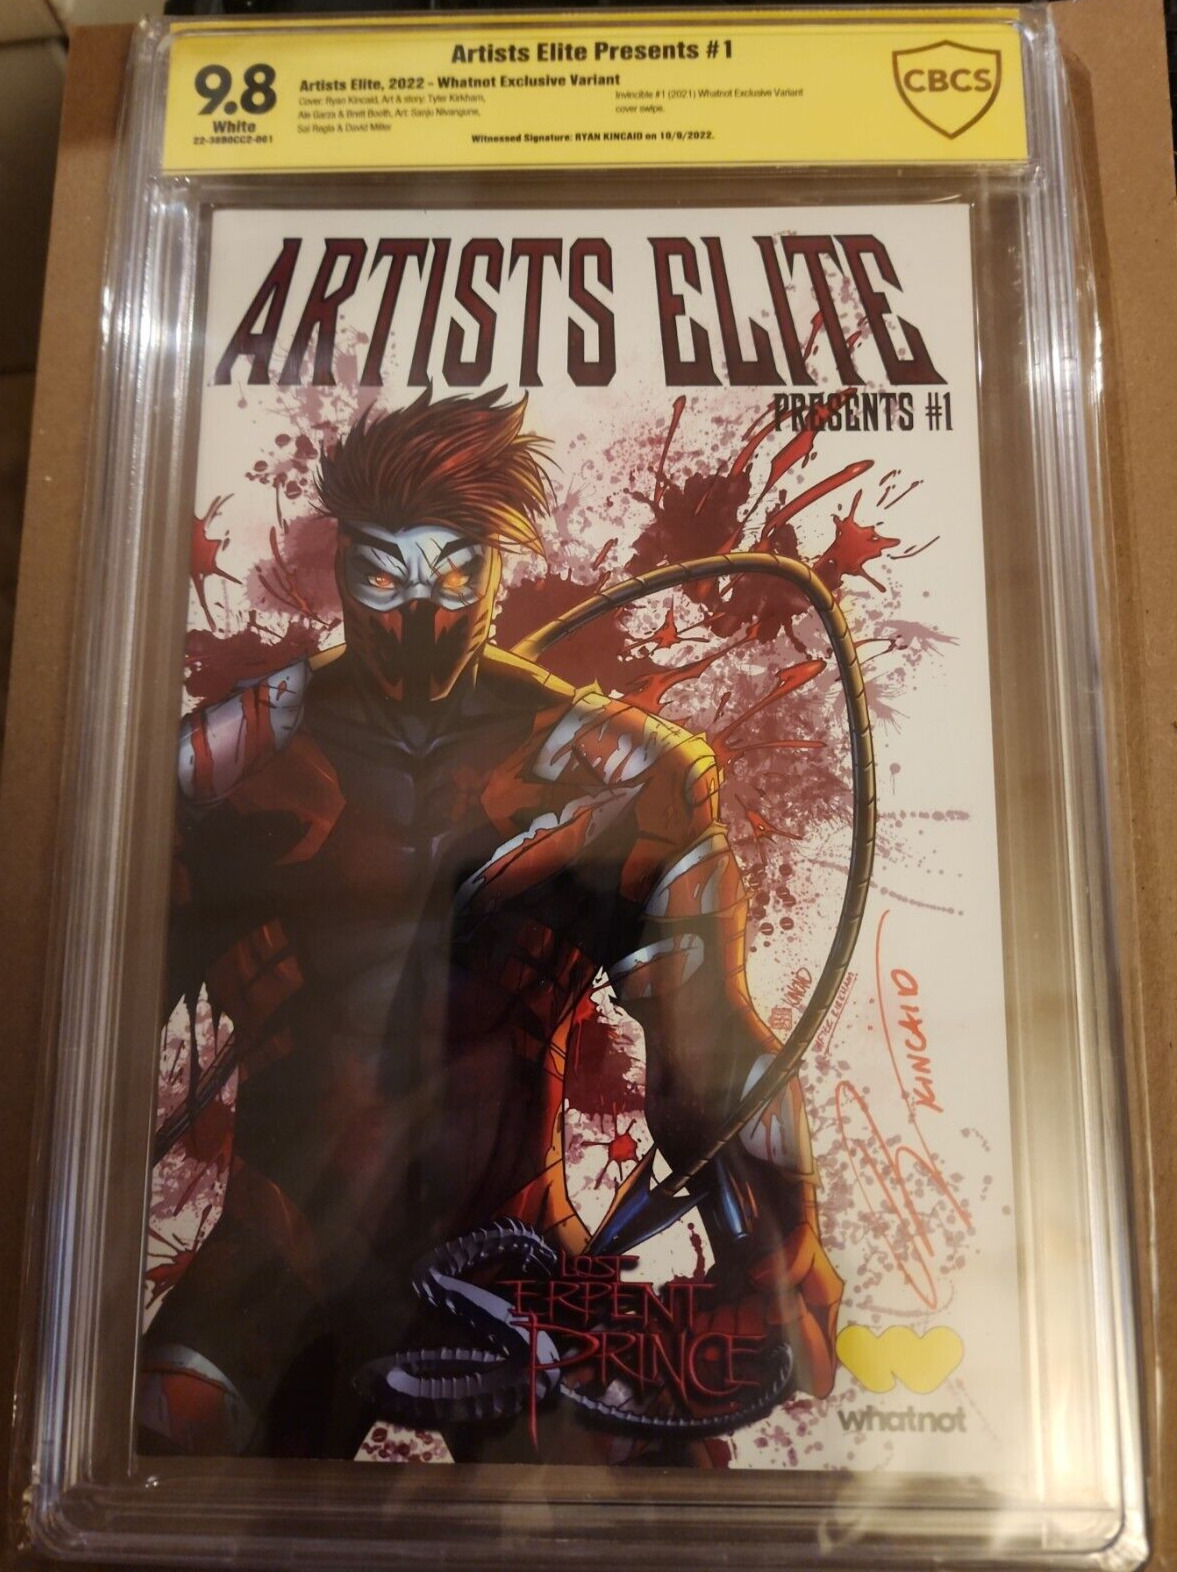 Artists Elite Presents #1 Lost Serpent Prince 9.8 CBCS Signed by Ryan Kincaid